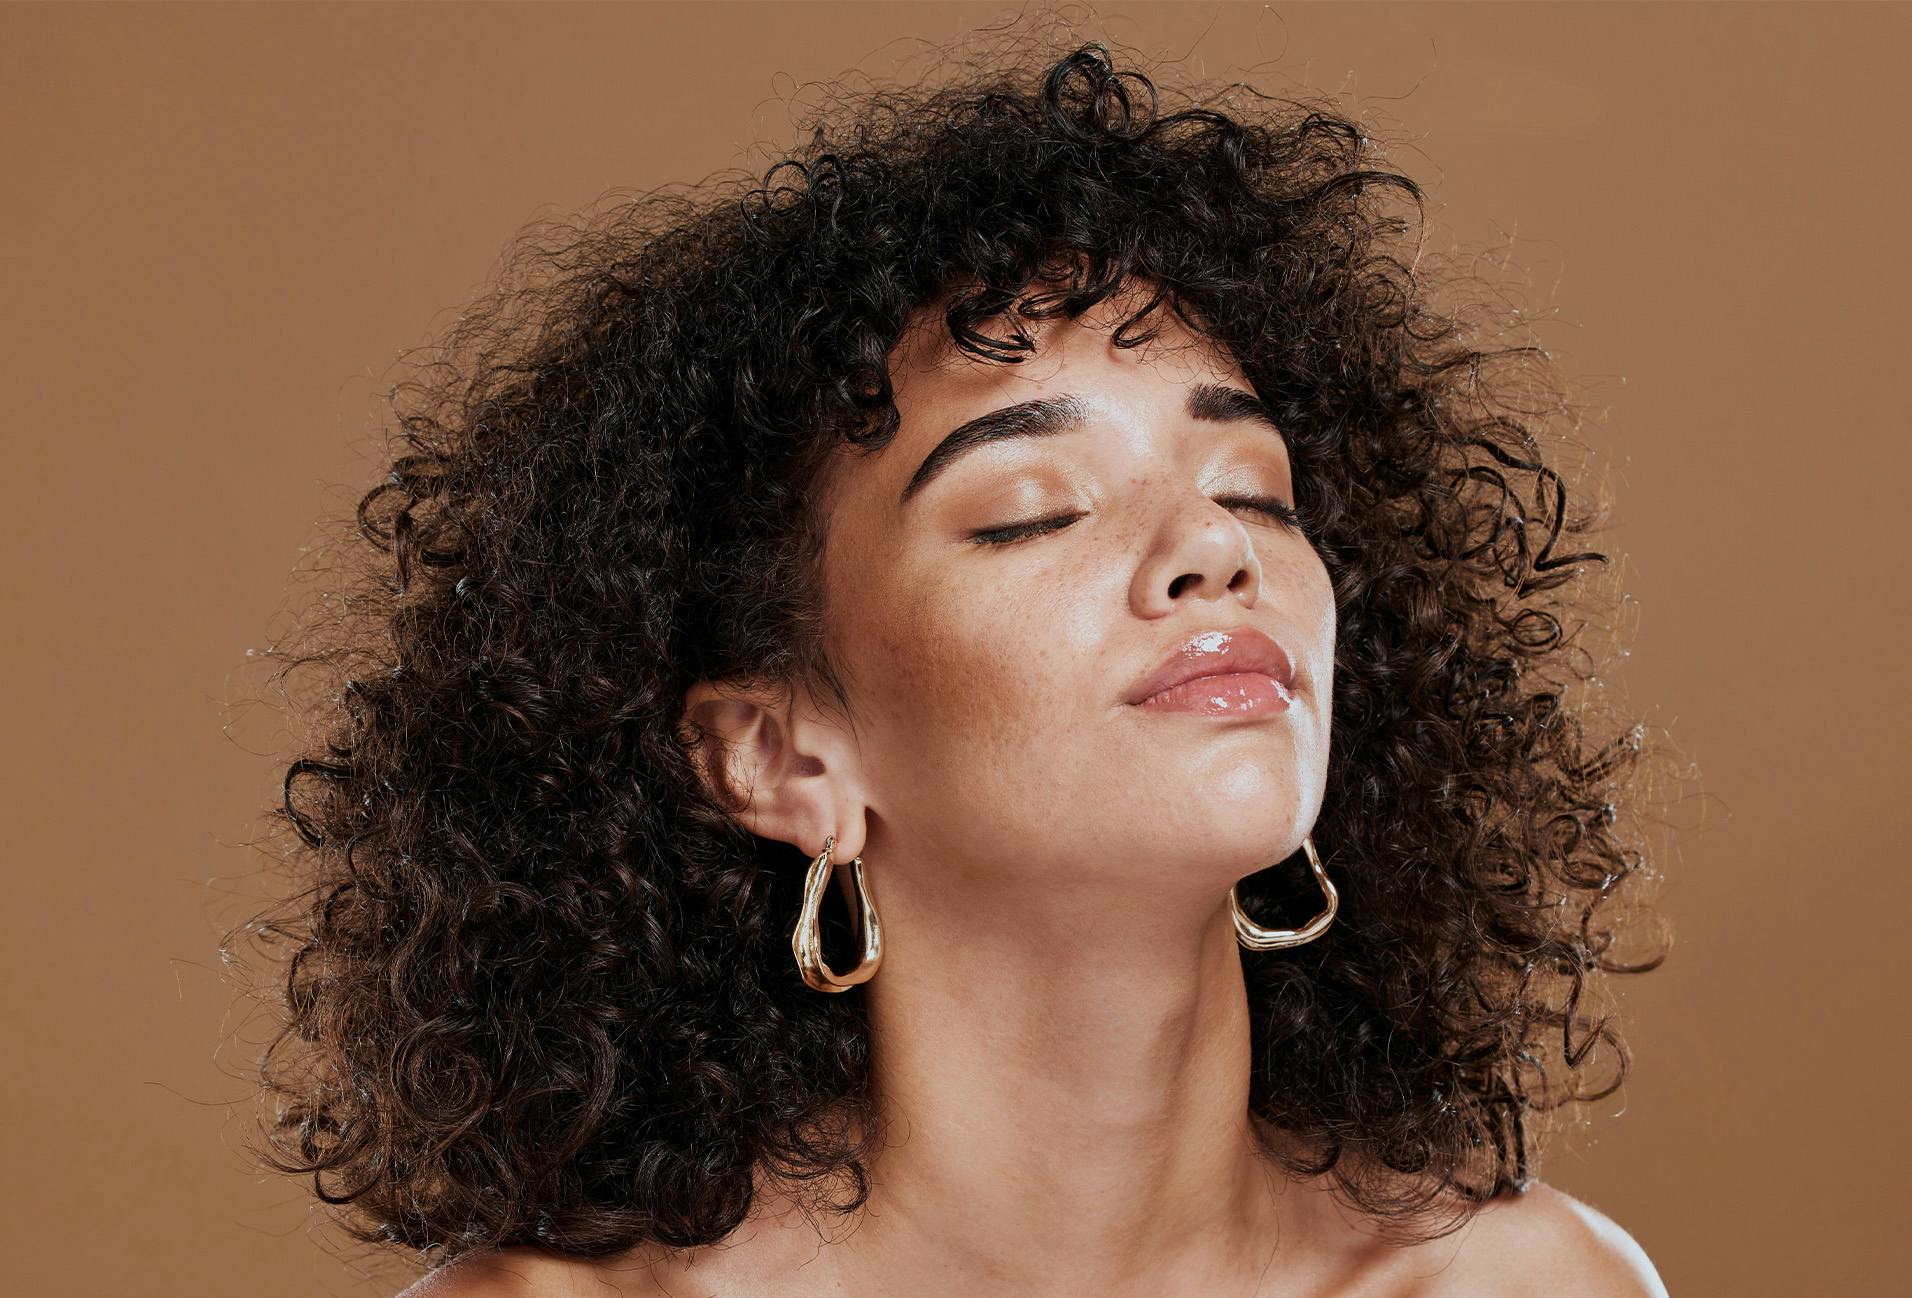 woman with very curly hair and freckles